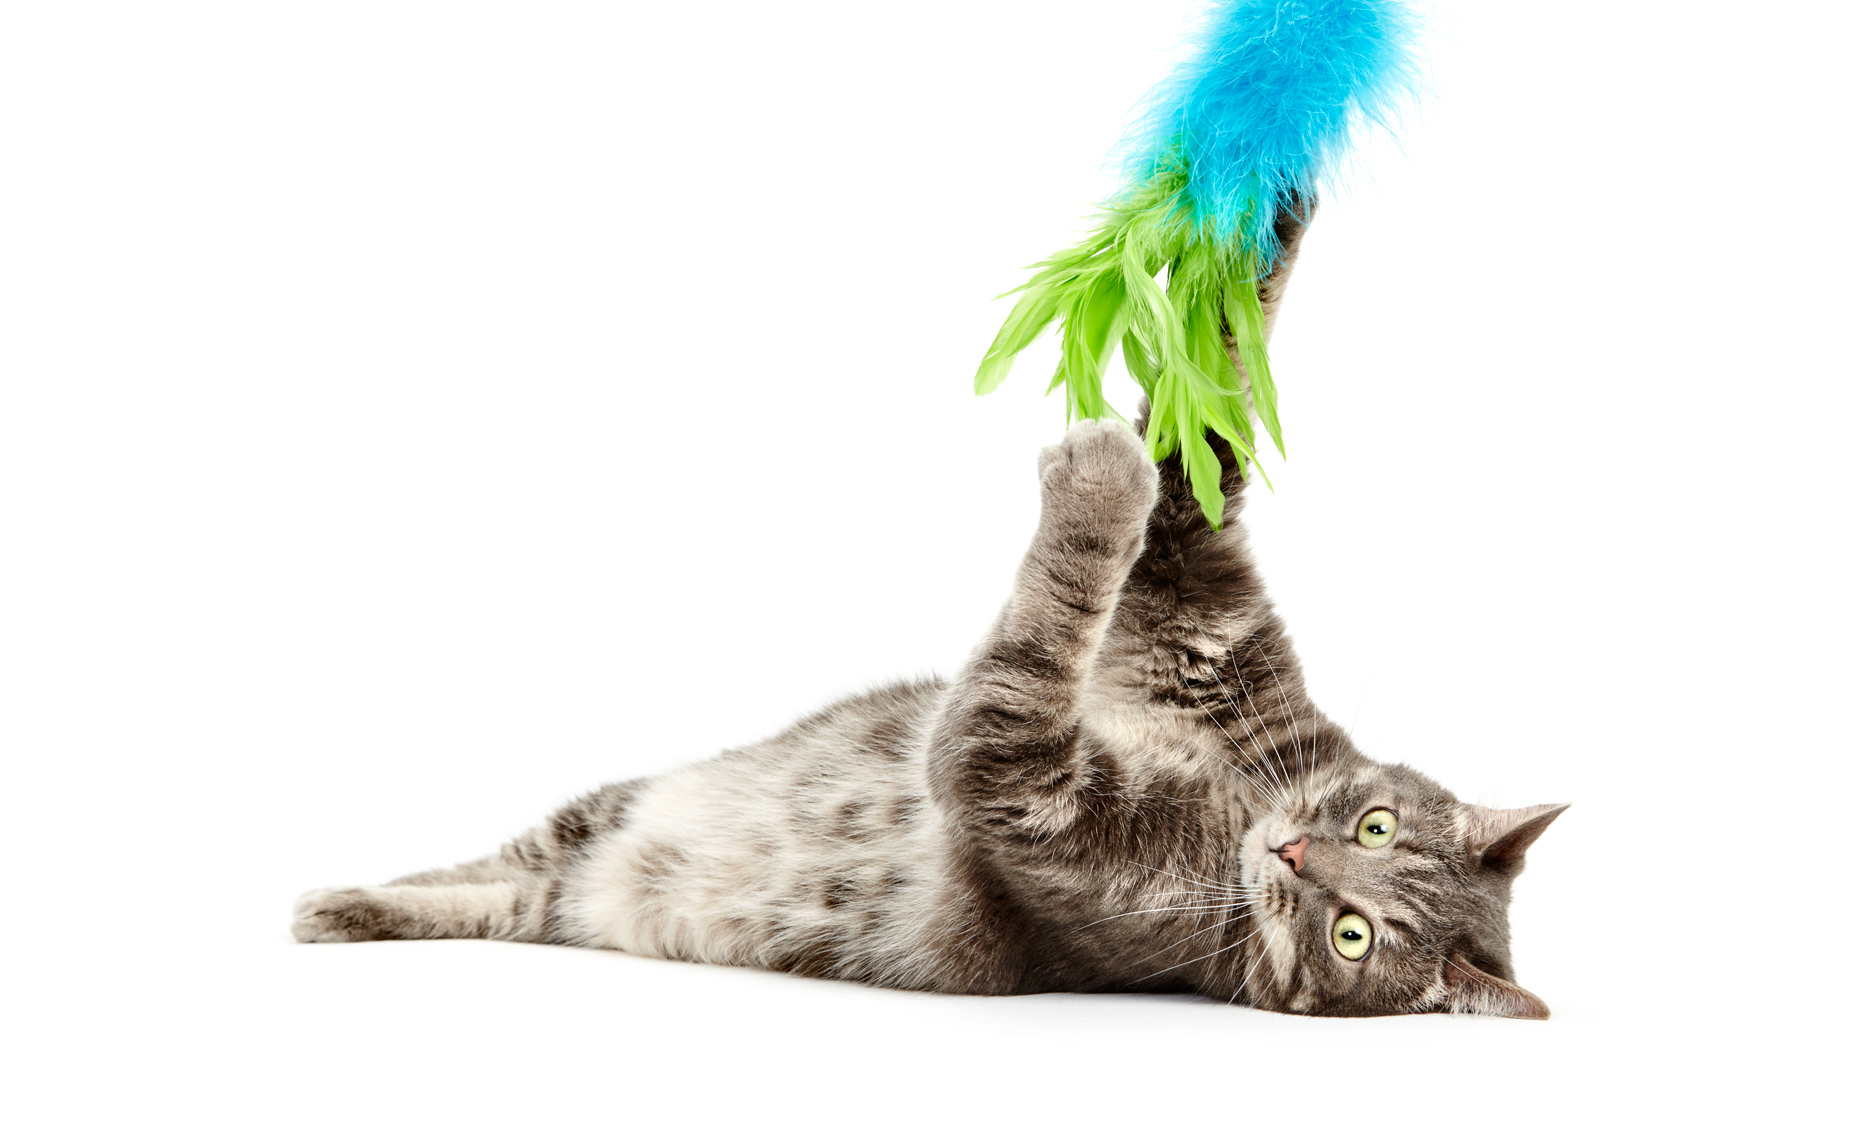 Cat playing with duster toy